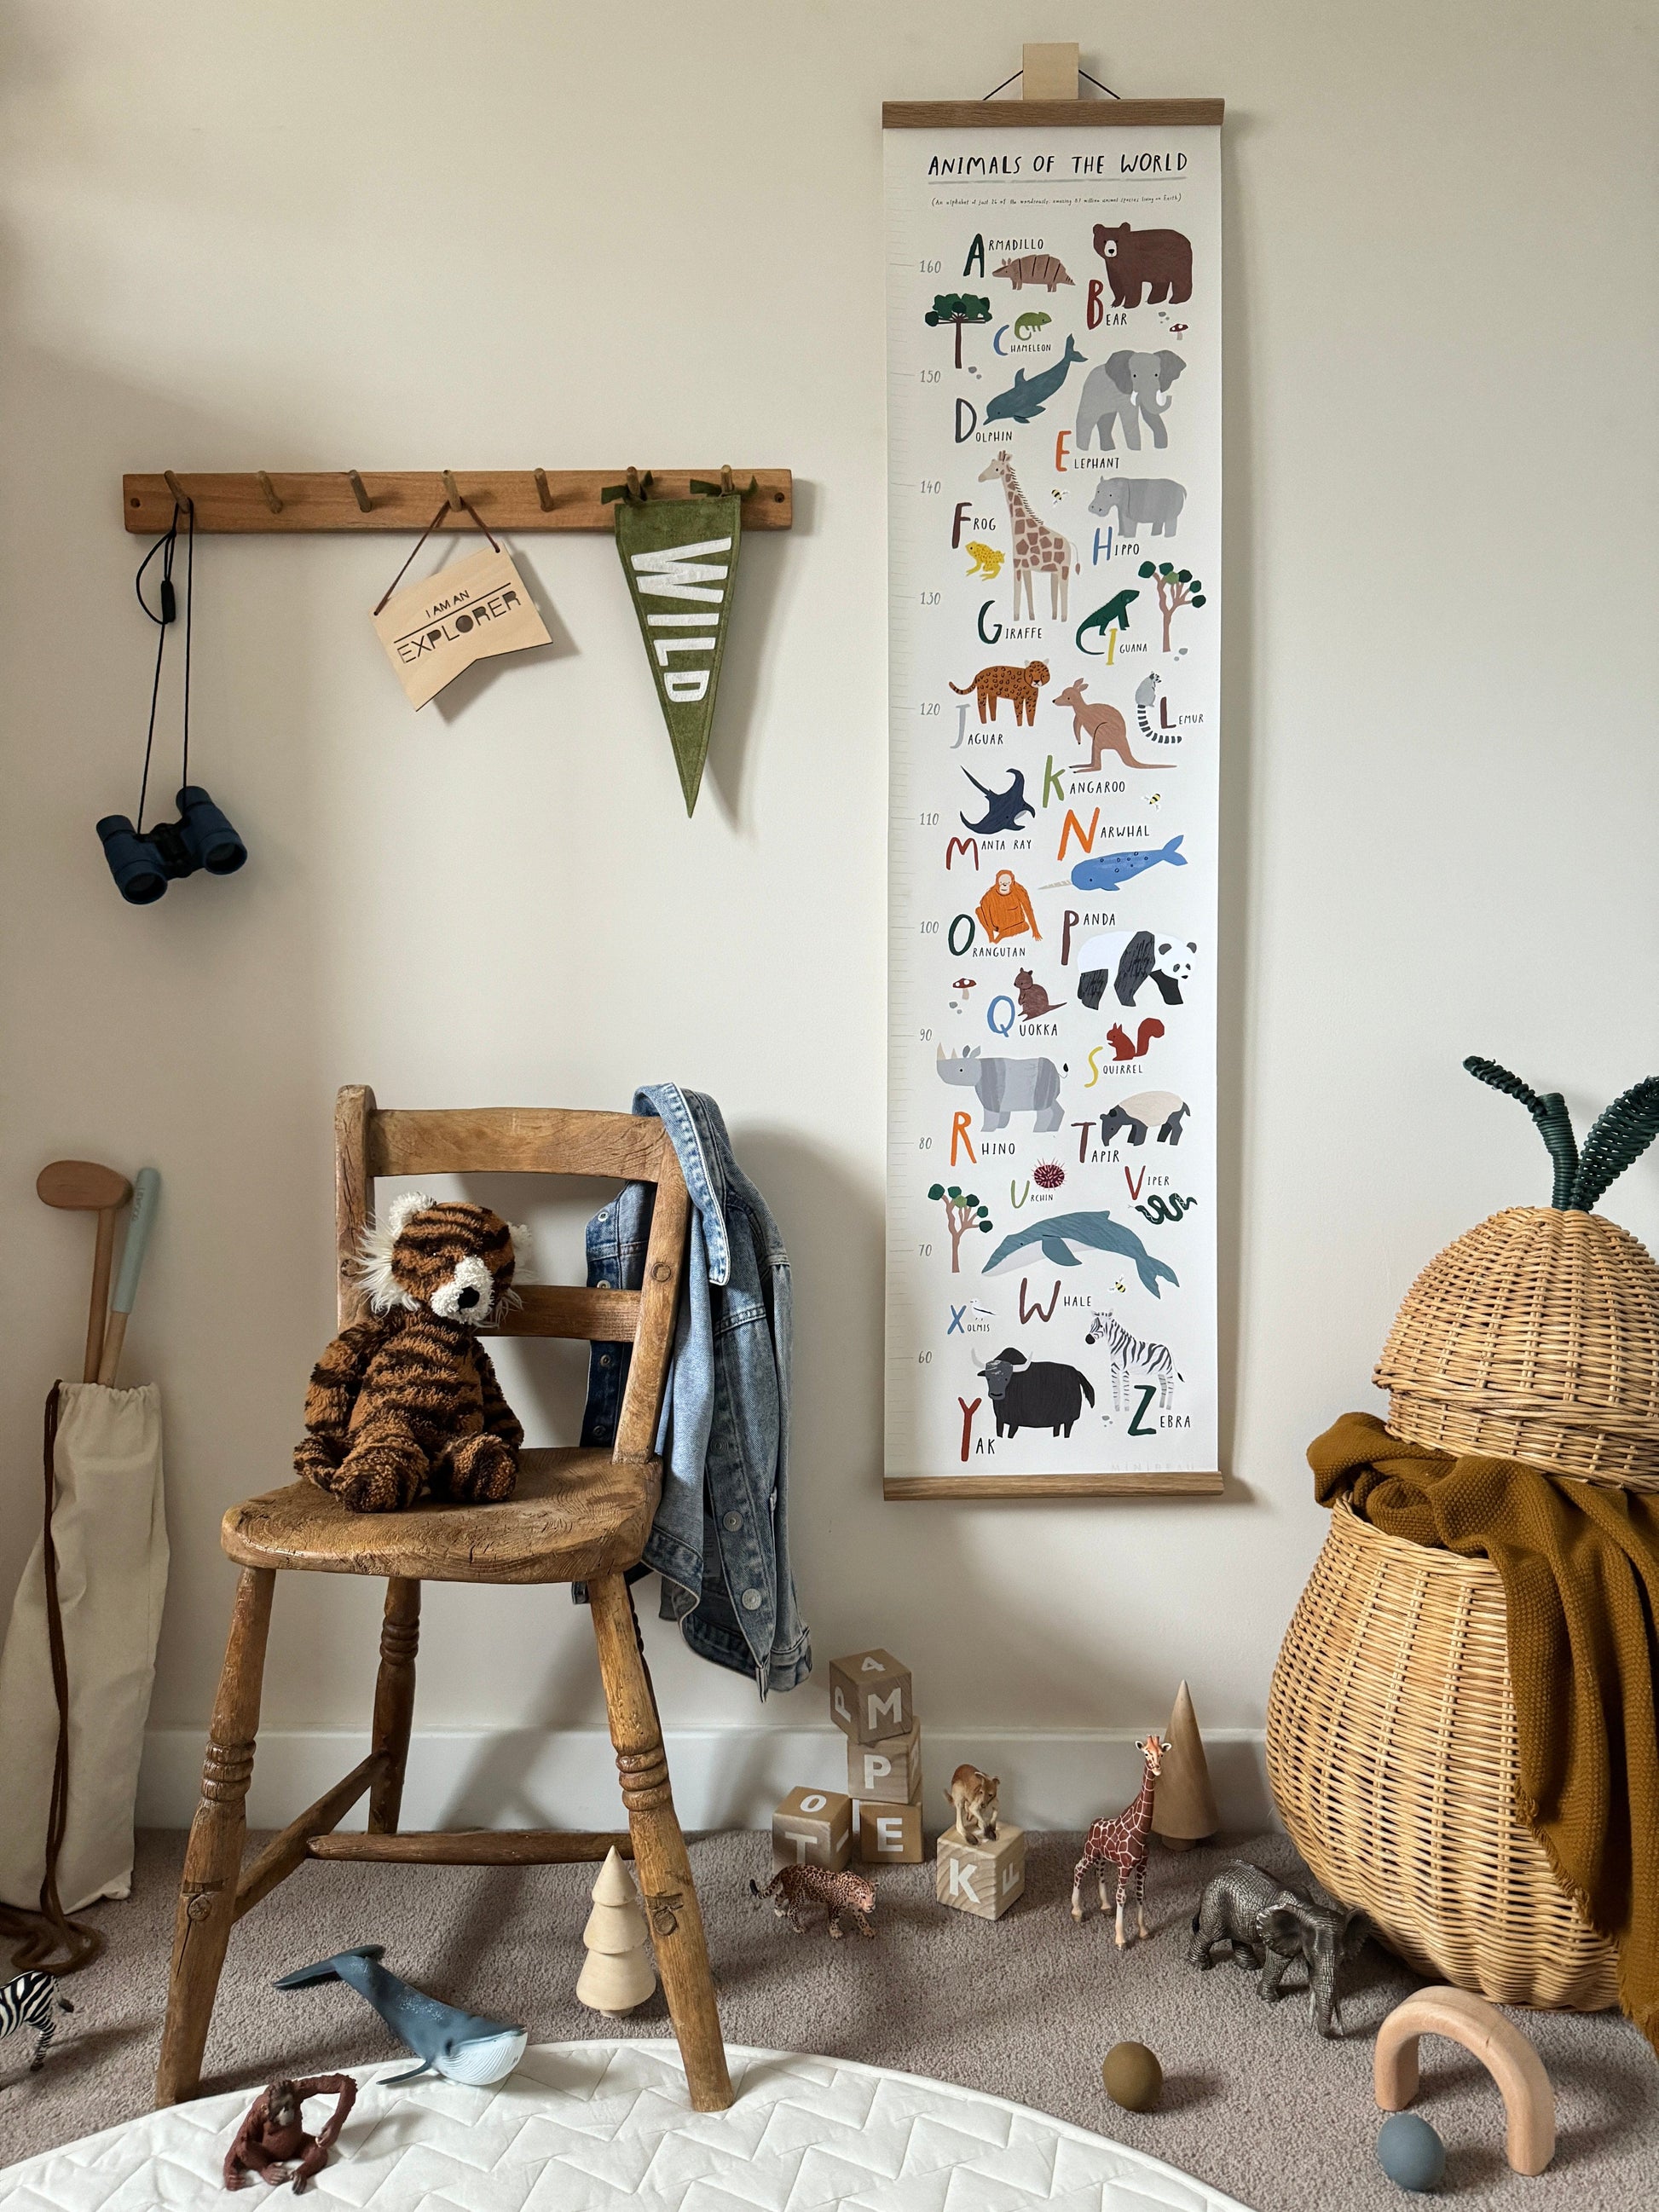 Animals of the world height chart hanging from a square wooden hook, next to a vintage wood coat hook rail, with a vintage wooden chair underneath with a plush tiger on, Shleich animals are on the floor with wooden alphabet blocks